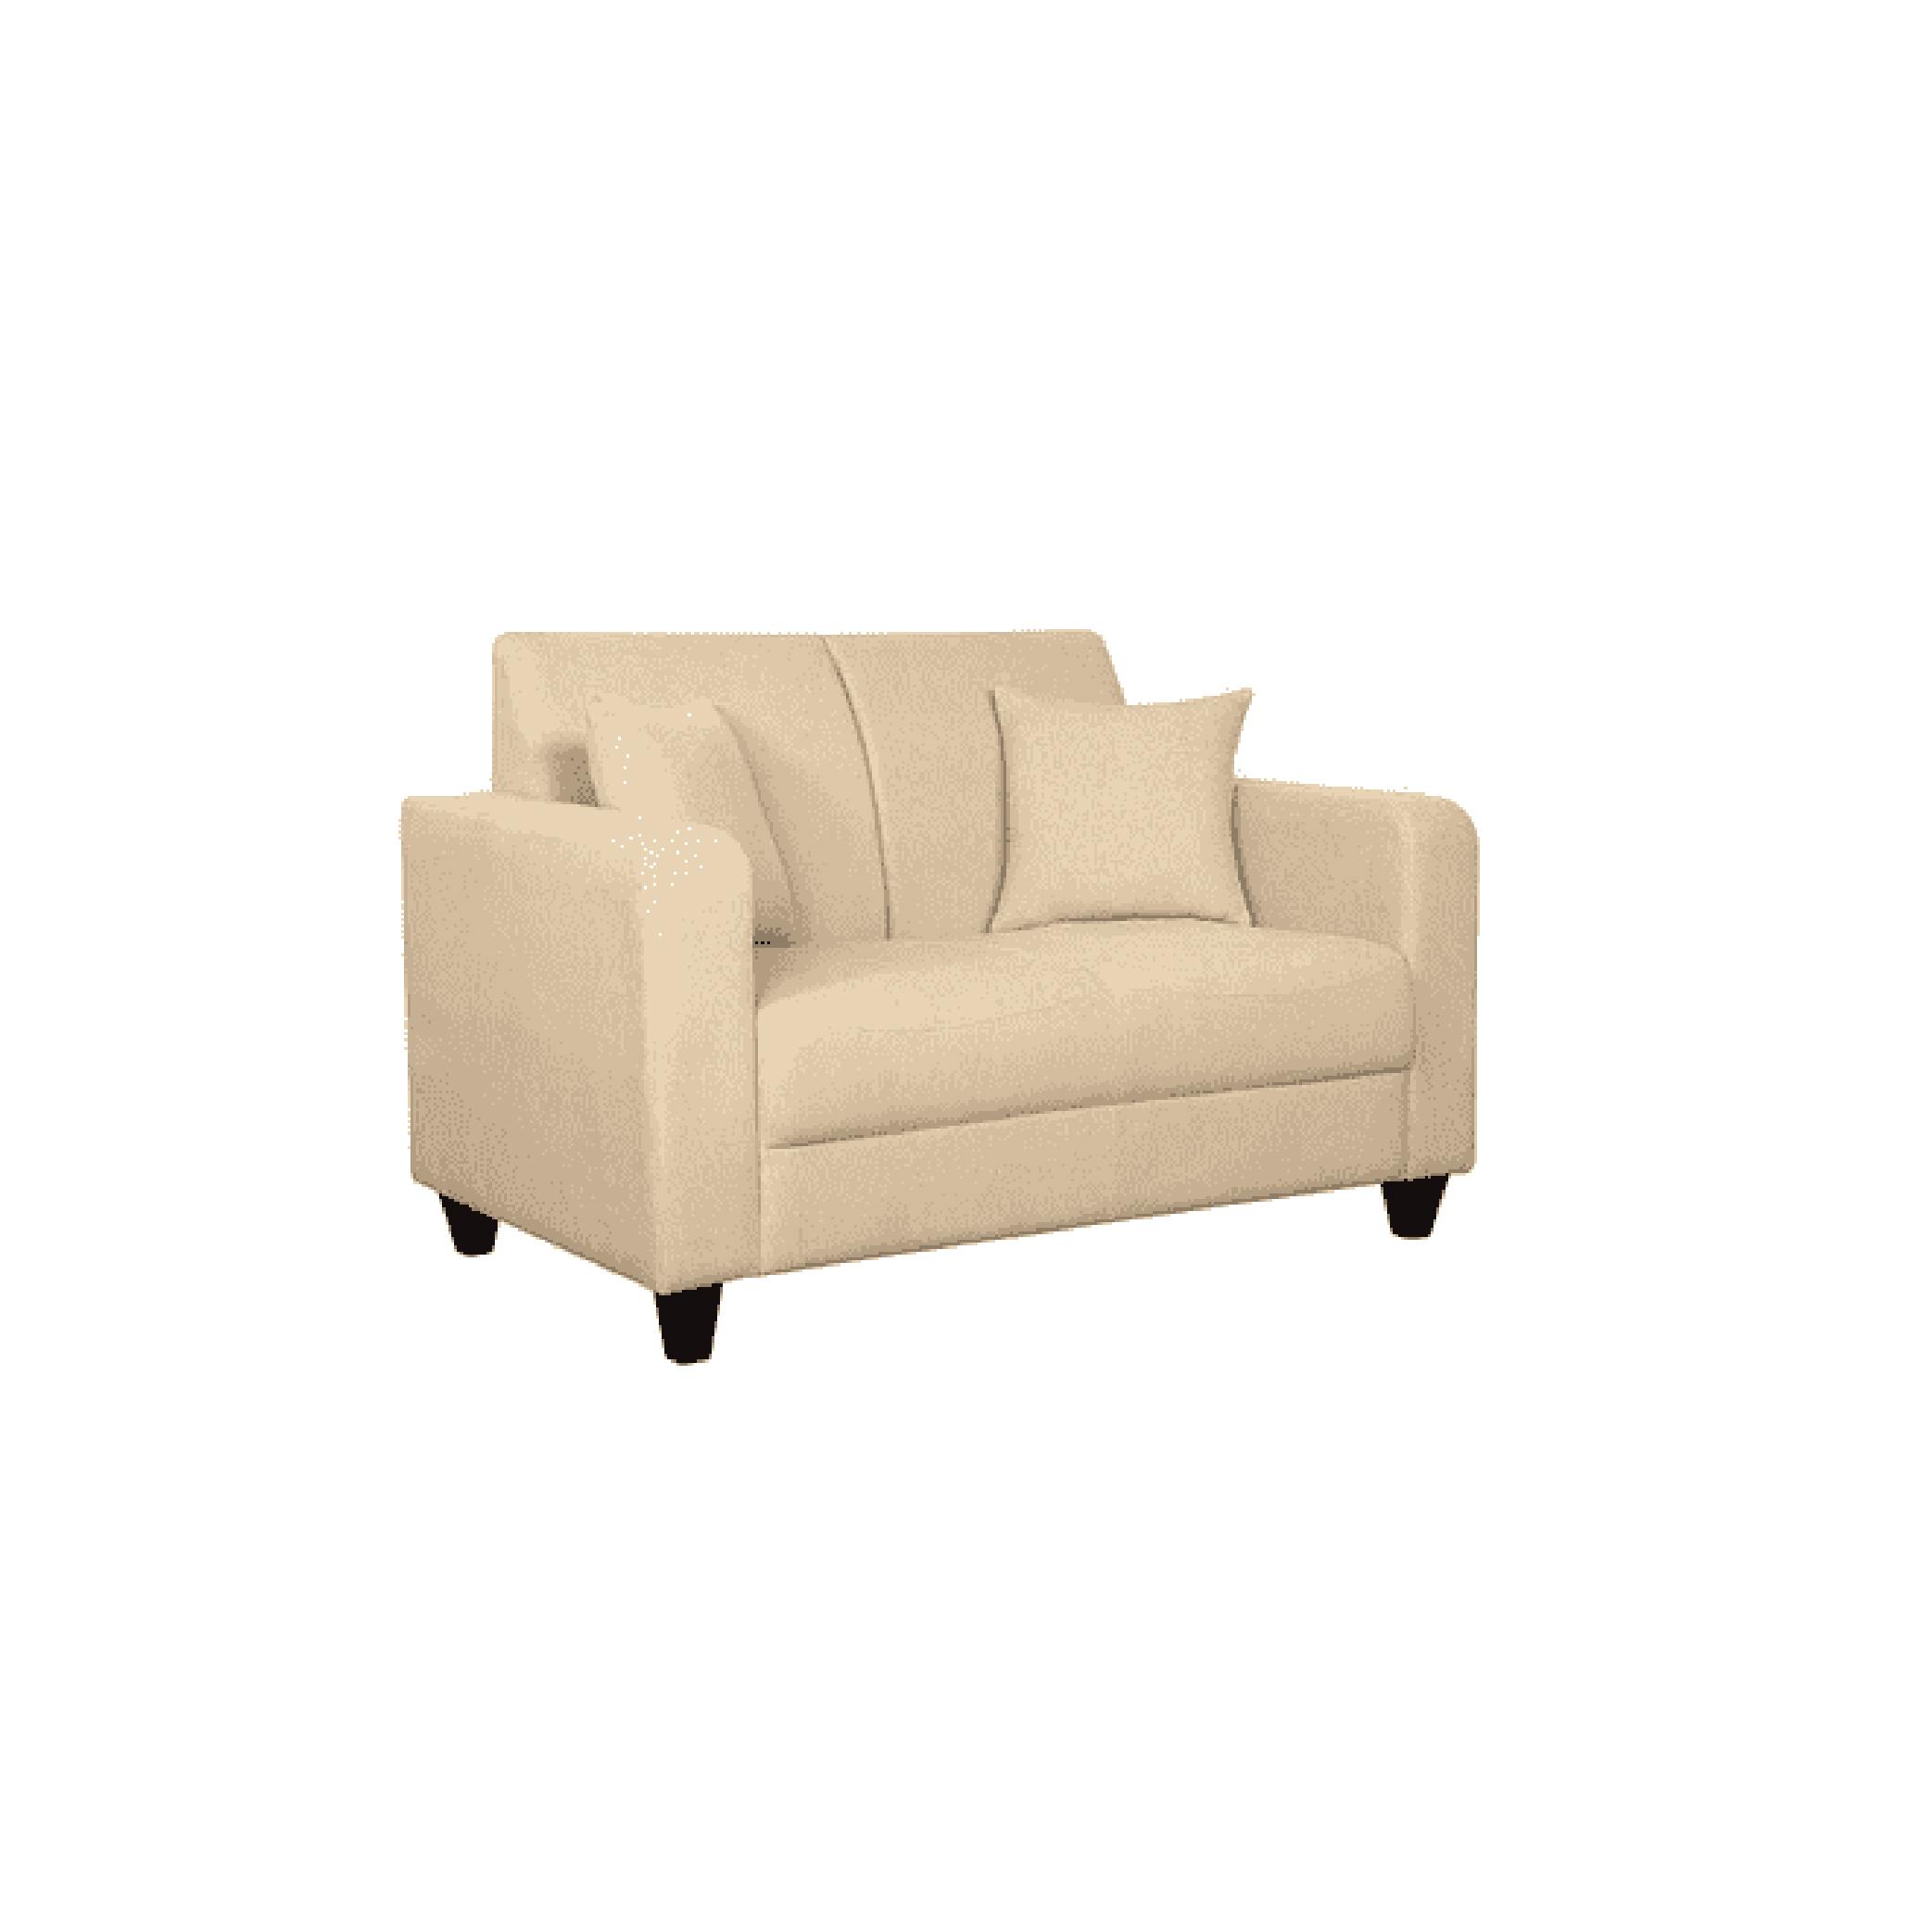 Naples Two Seater Sofa in Beige Colour